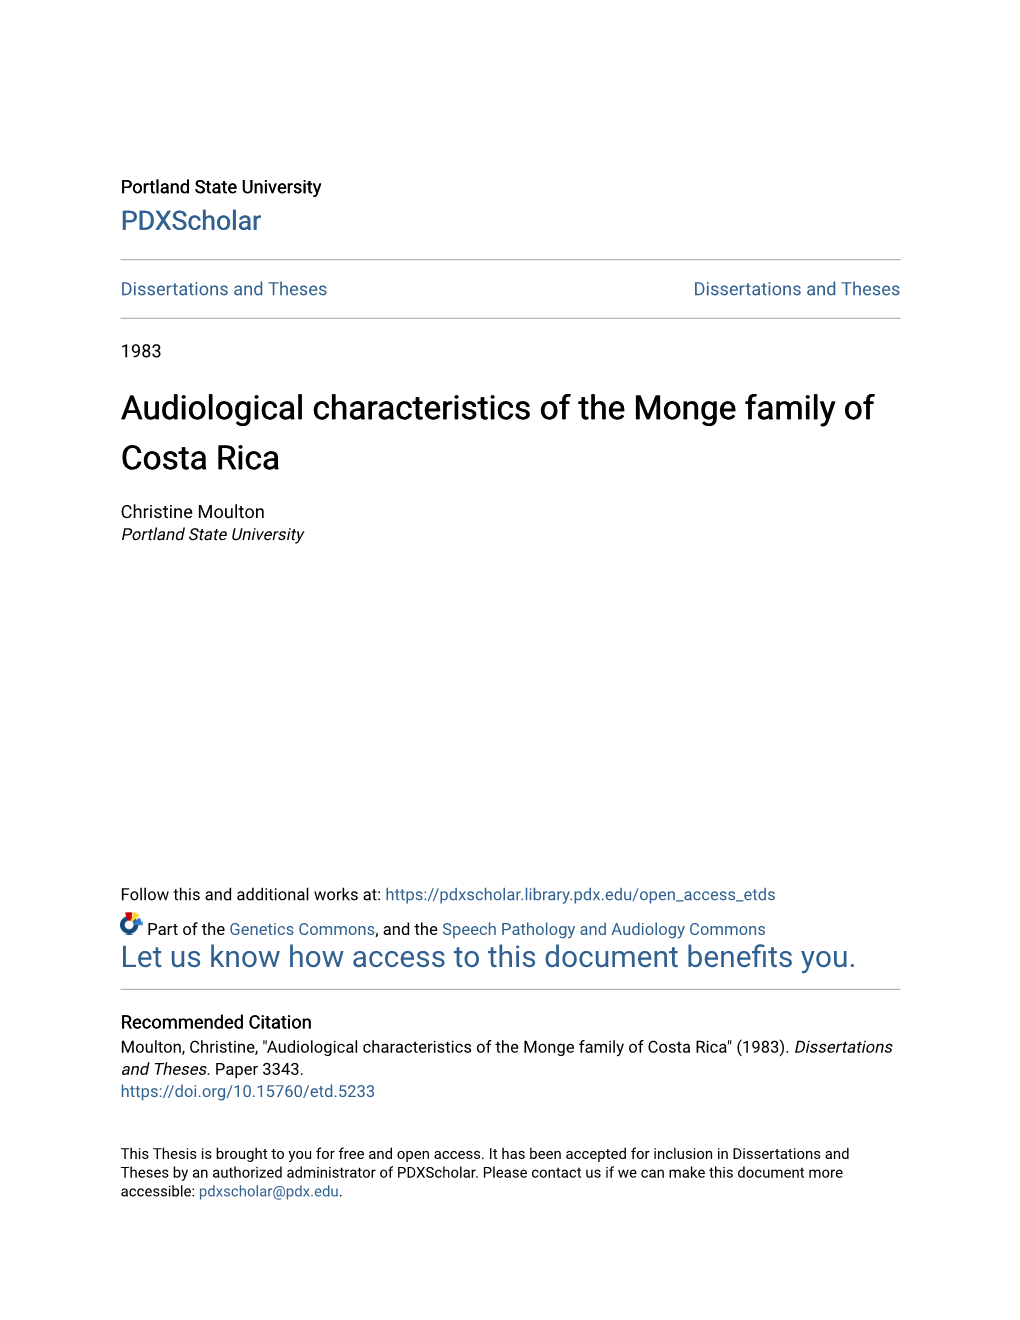 Audiological Characteristics of the Monge Family of Costa Rica